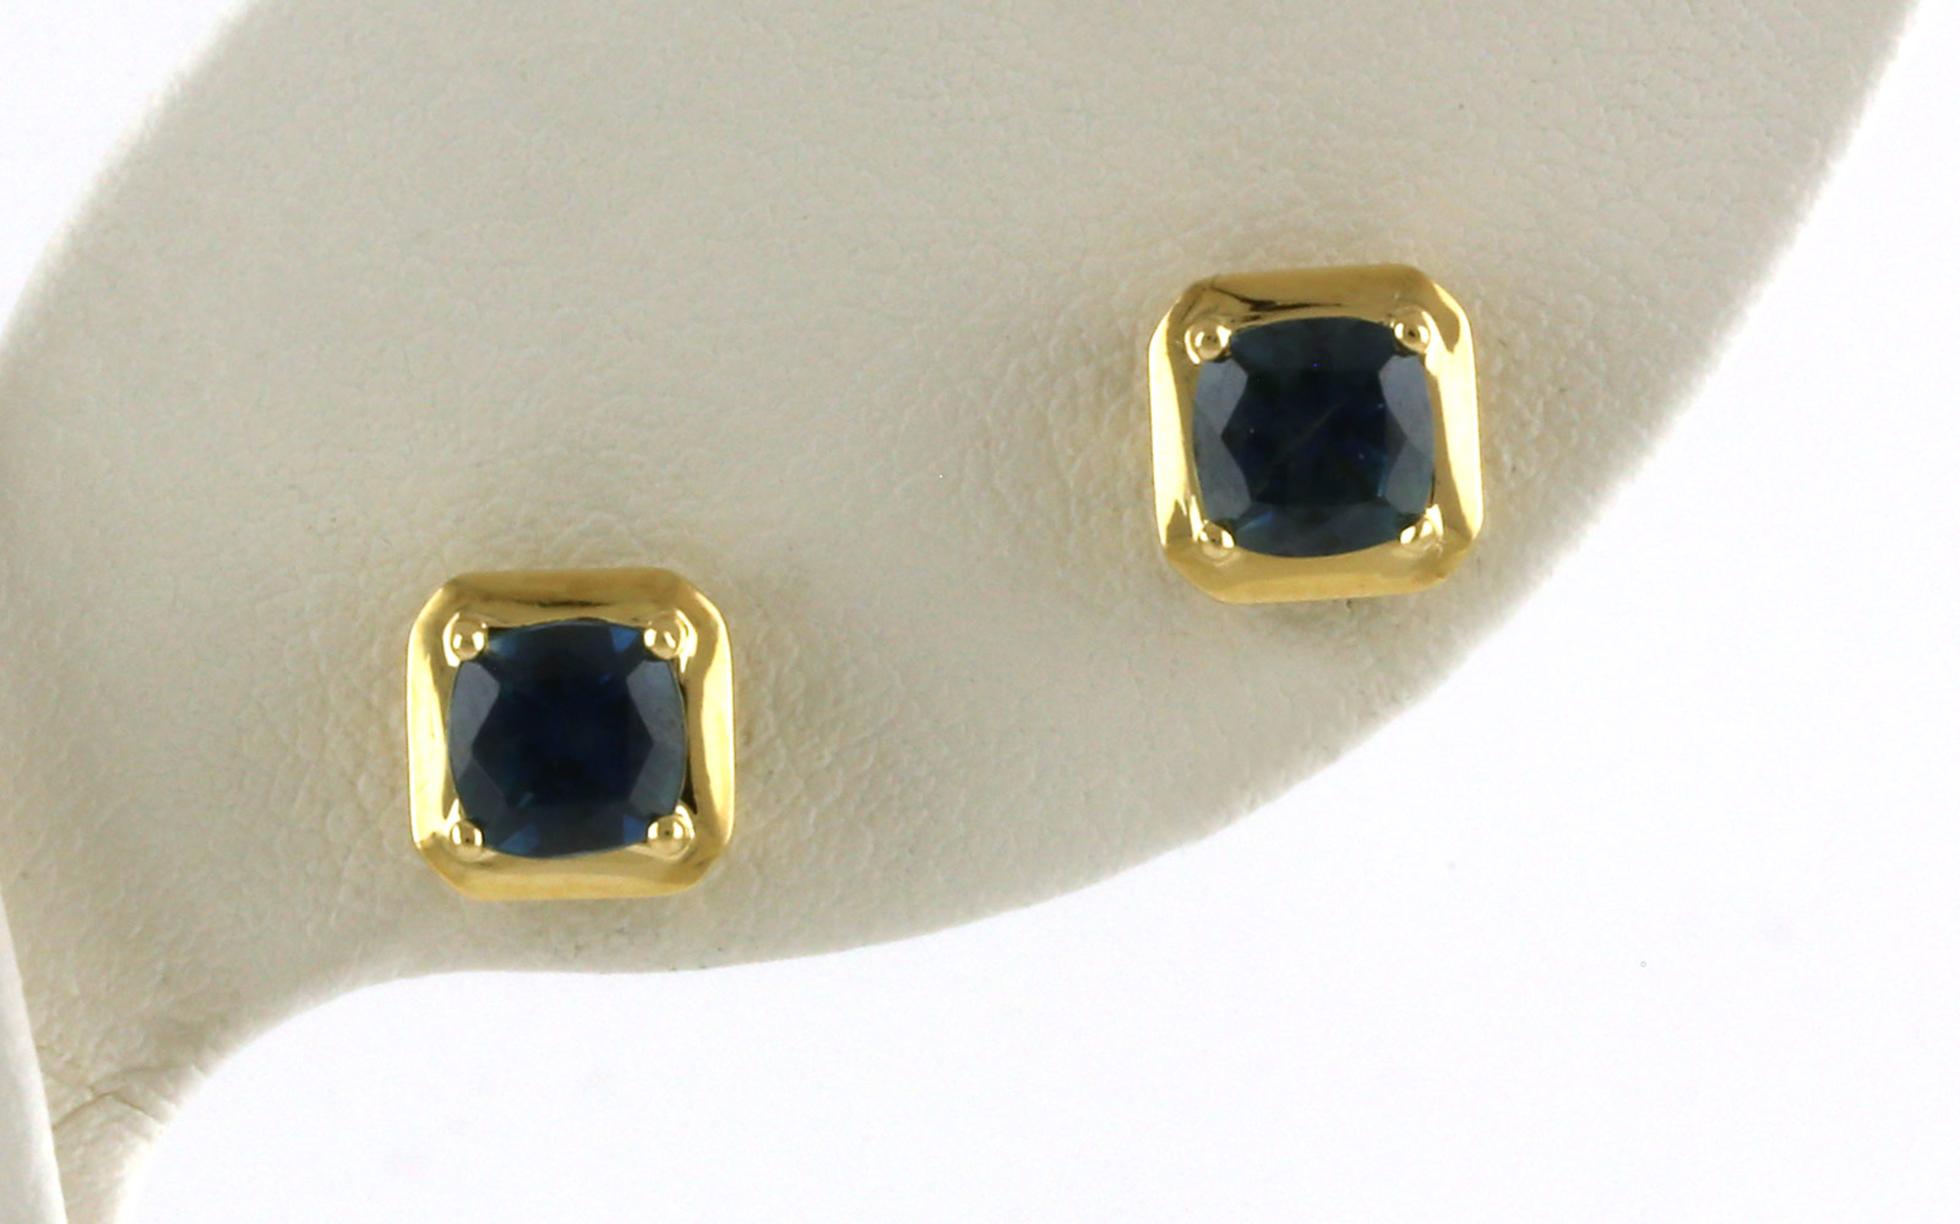 Geometric-style Cushion-cut Montana Sapphire Stud Earrings in Yellow Gold (1.60cts TWT)